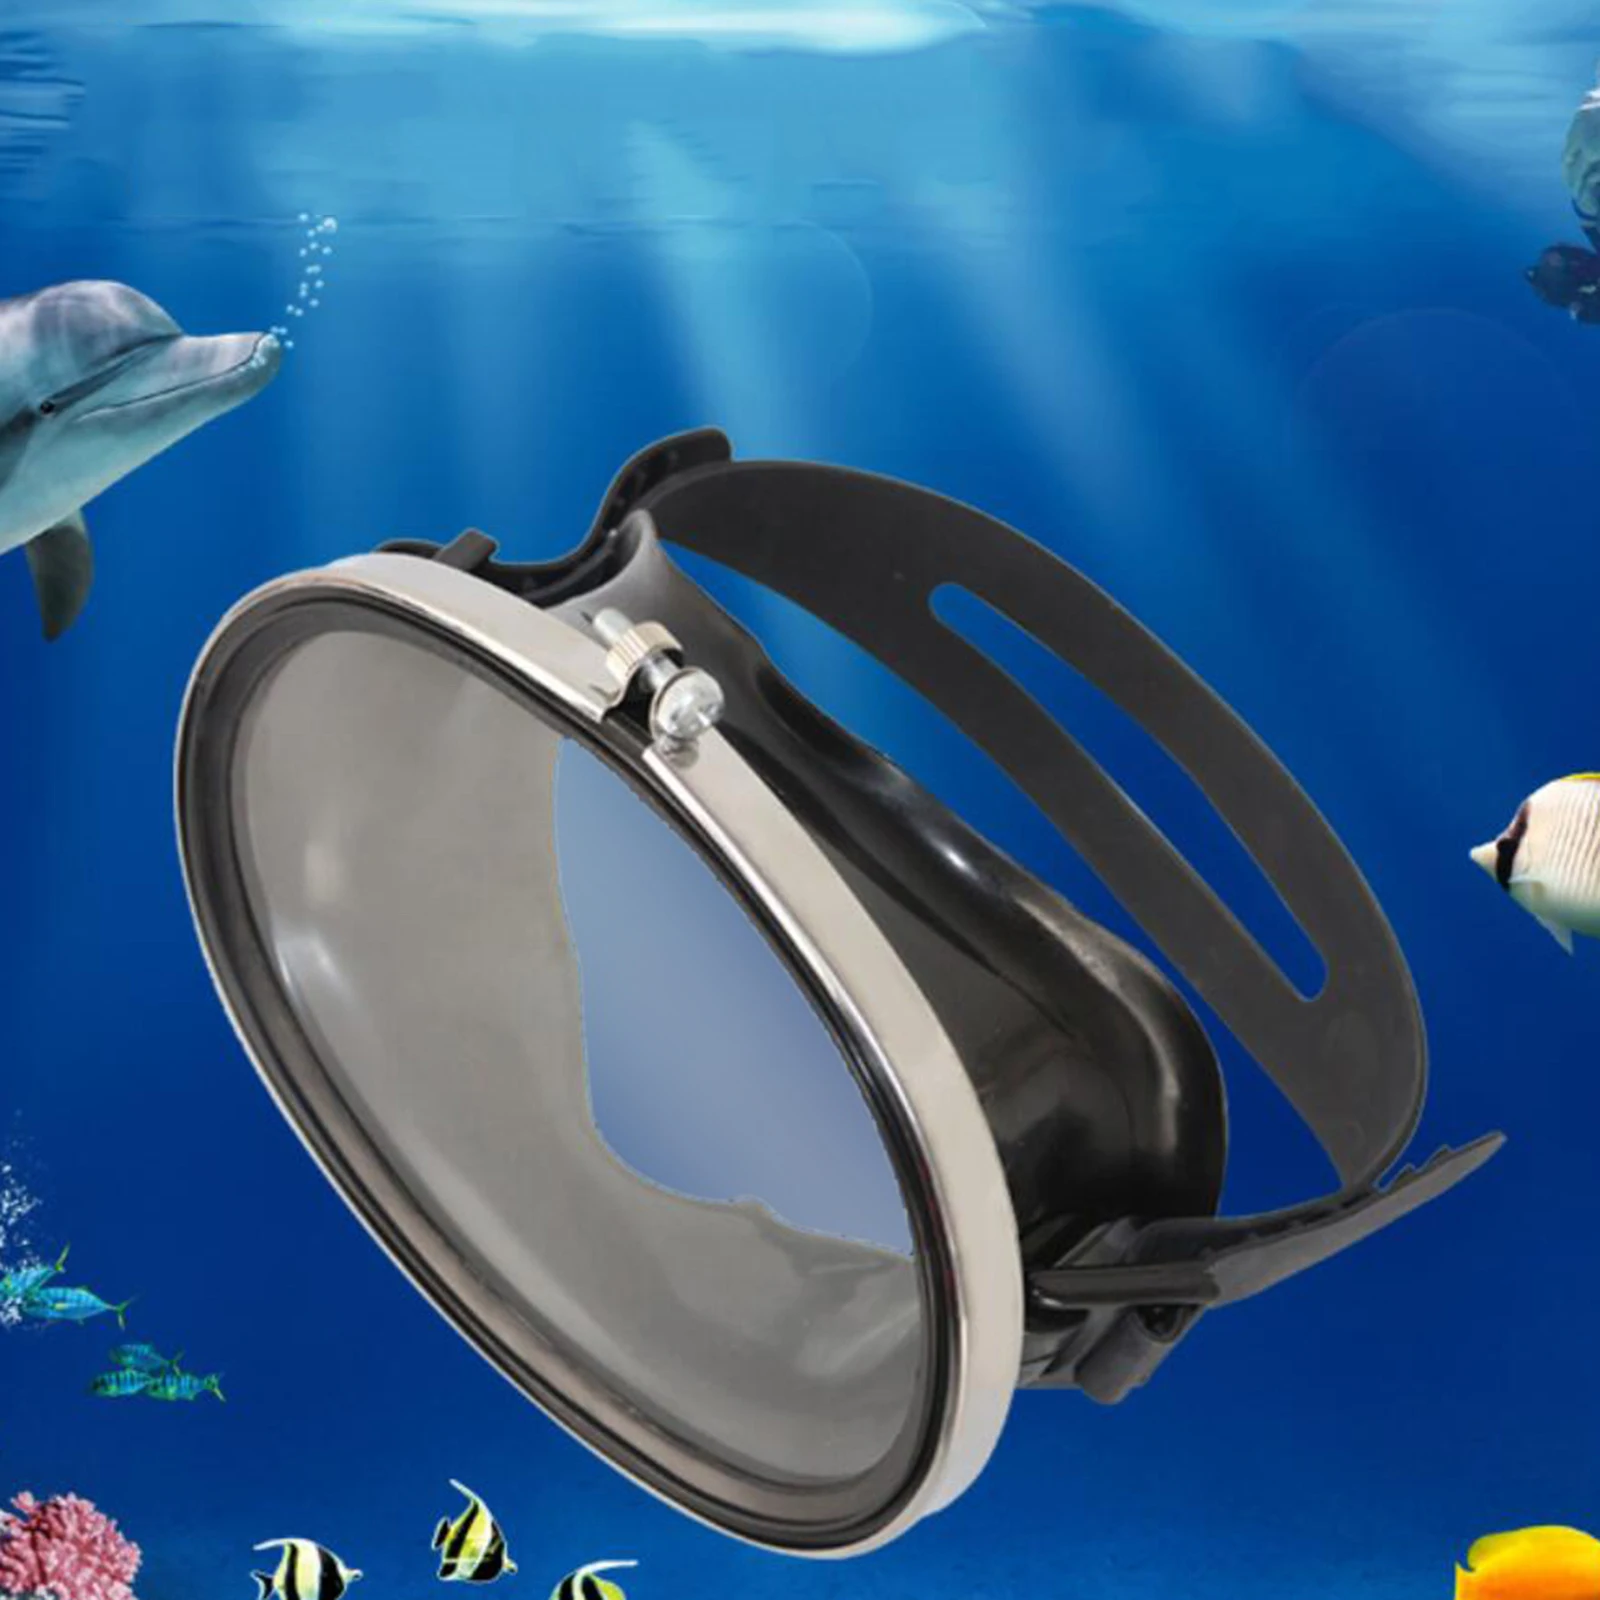 Classic Oval Diving Mask Scuba Diving & Spearfishing Anti-Fog Single Lens Goggles Glasses with Silicone Strap for Adult